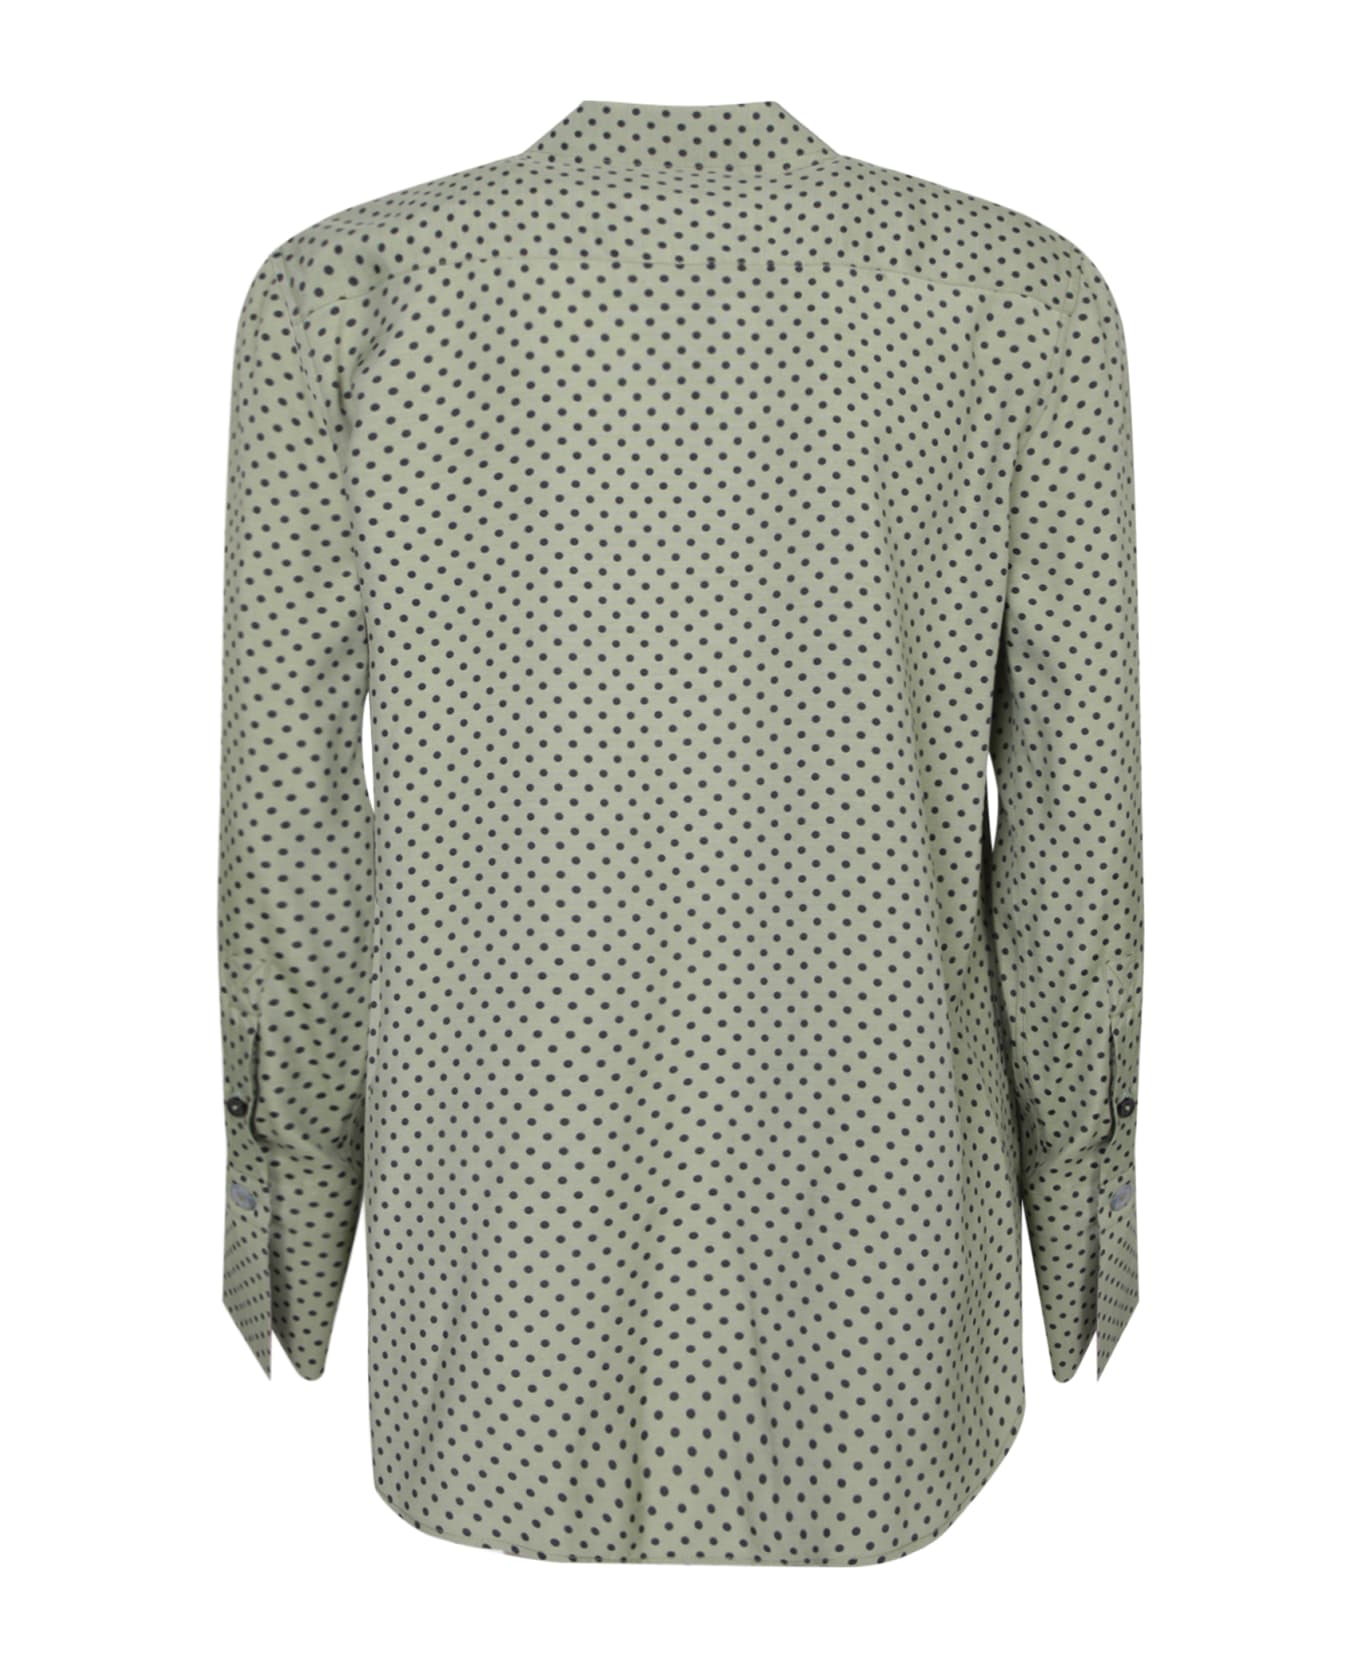 Paul Smith Patterned Green Shirt - Green